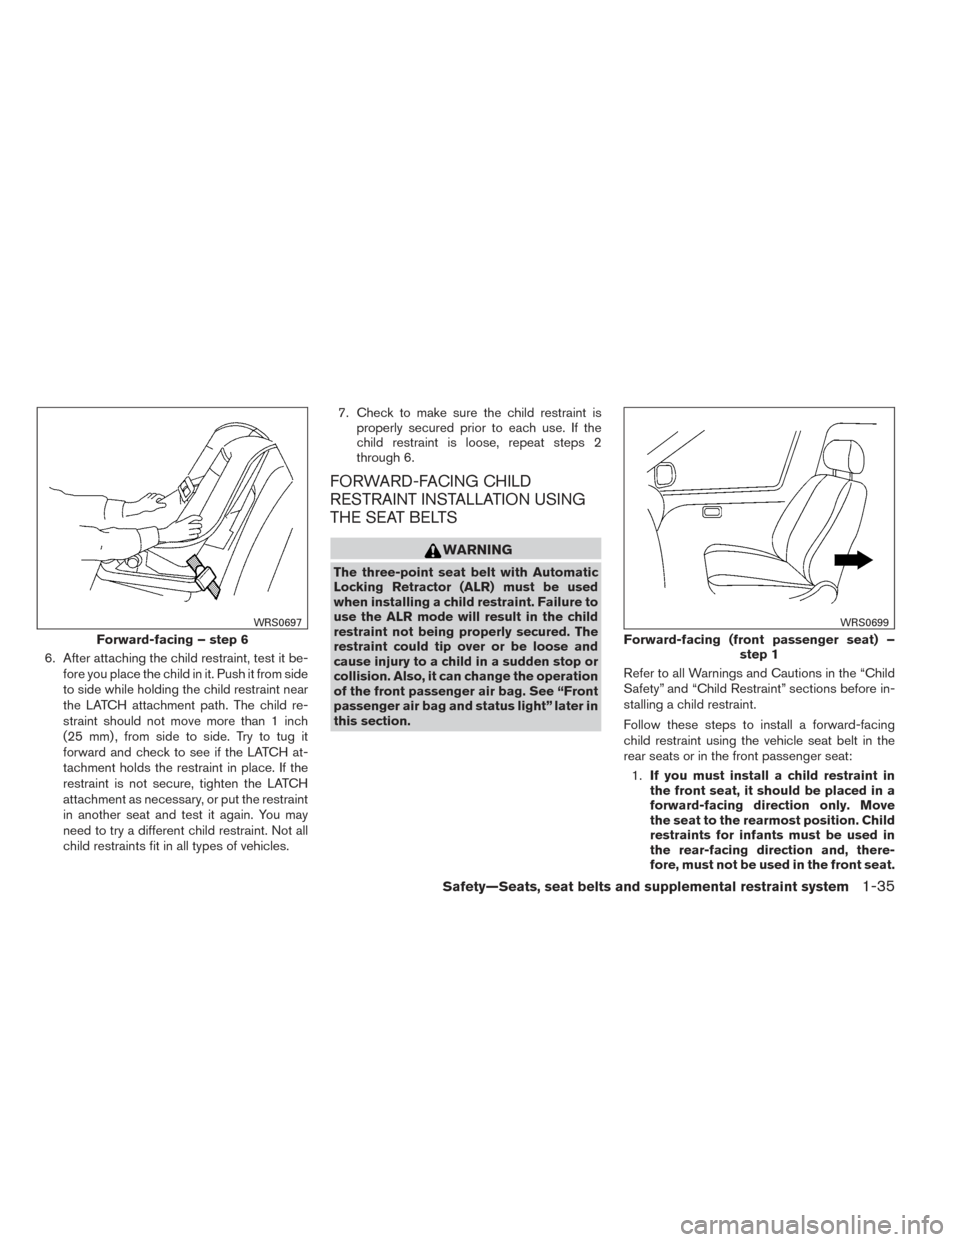 NISSAN ALTIMA 2014 L33 / 5.G Workshop Manual 6. After attaching the child restraint, test it be-fore you place the child in it. Push it from side
to side while holding the child restraint near
the LATCH attachment path. The child re-
straint sho